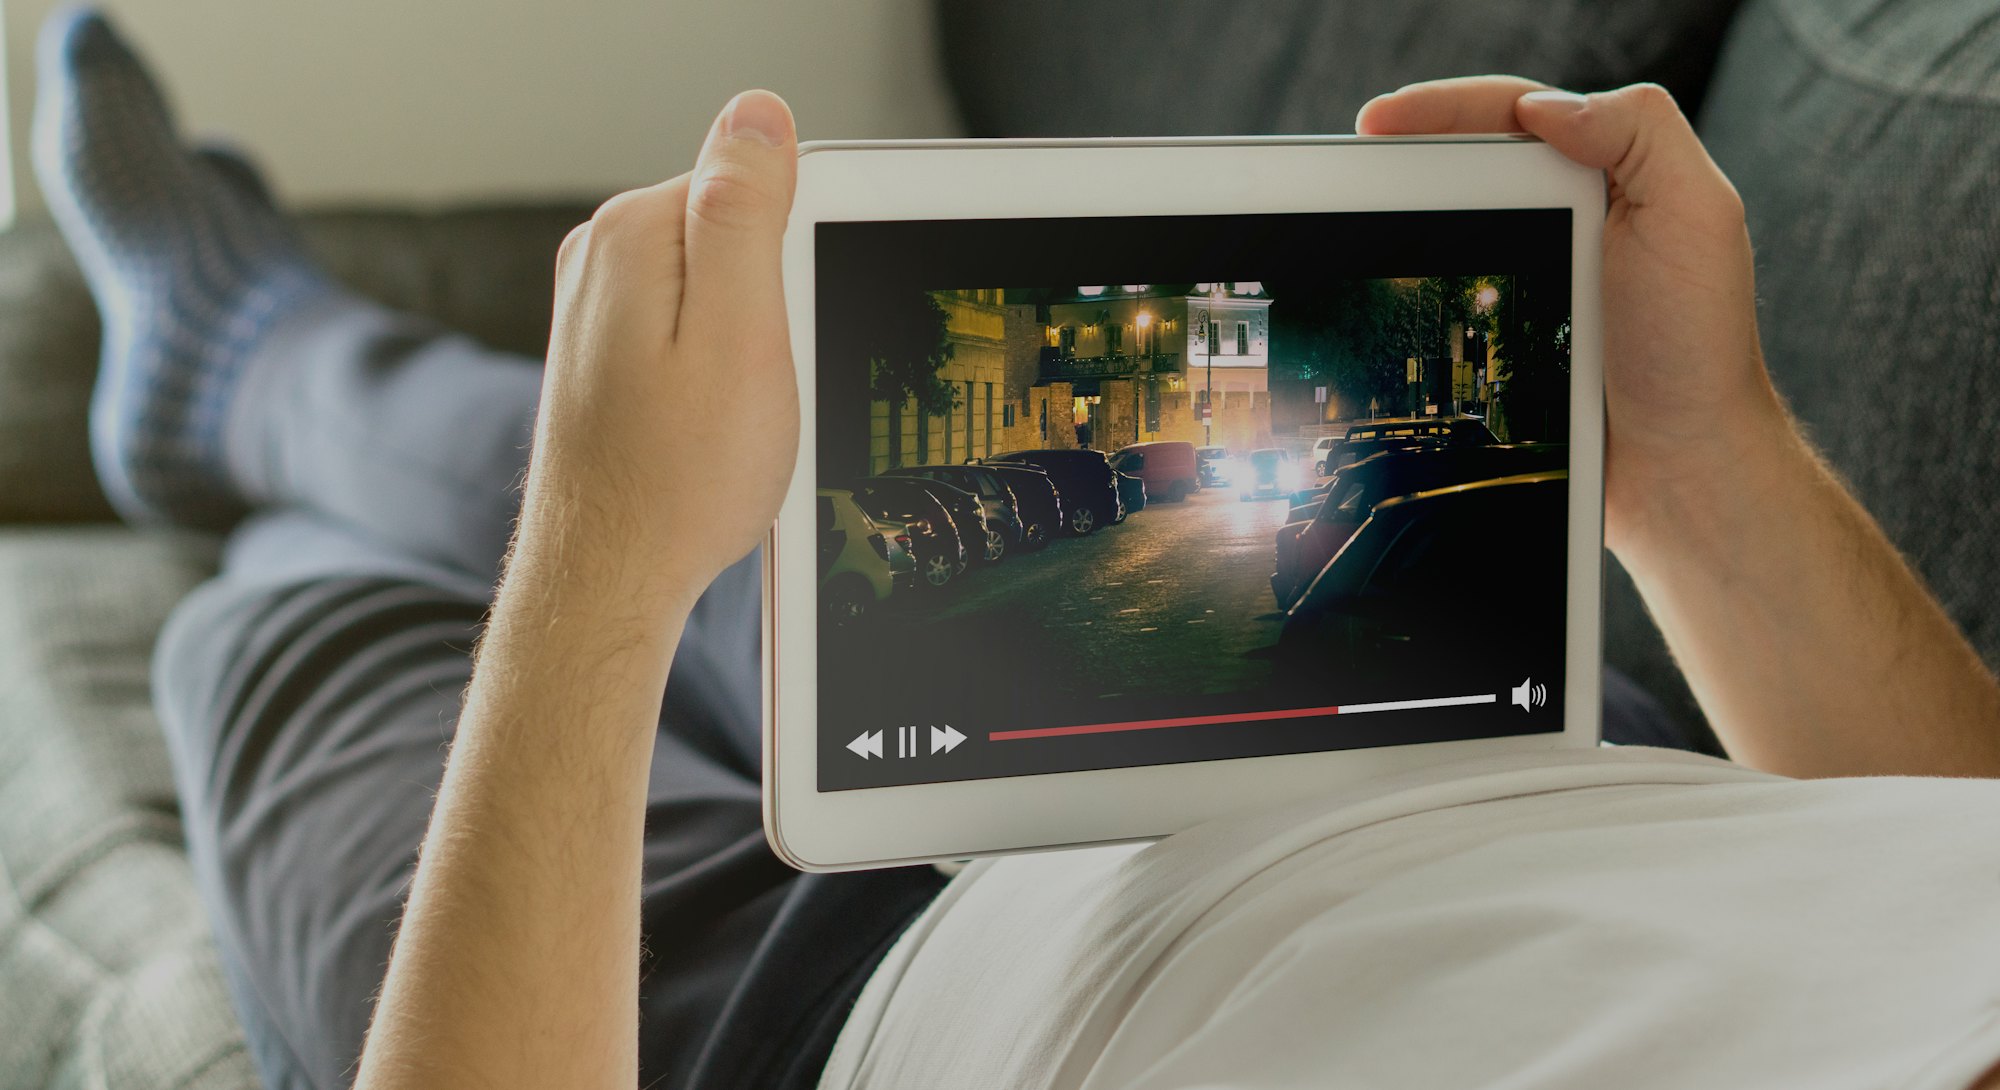 Online movie stream with mobile device. Man watching film on tablet with imaginary video player serv...